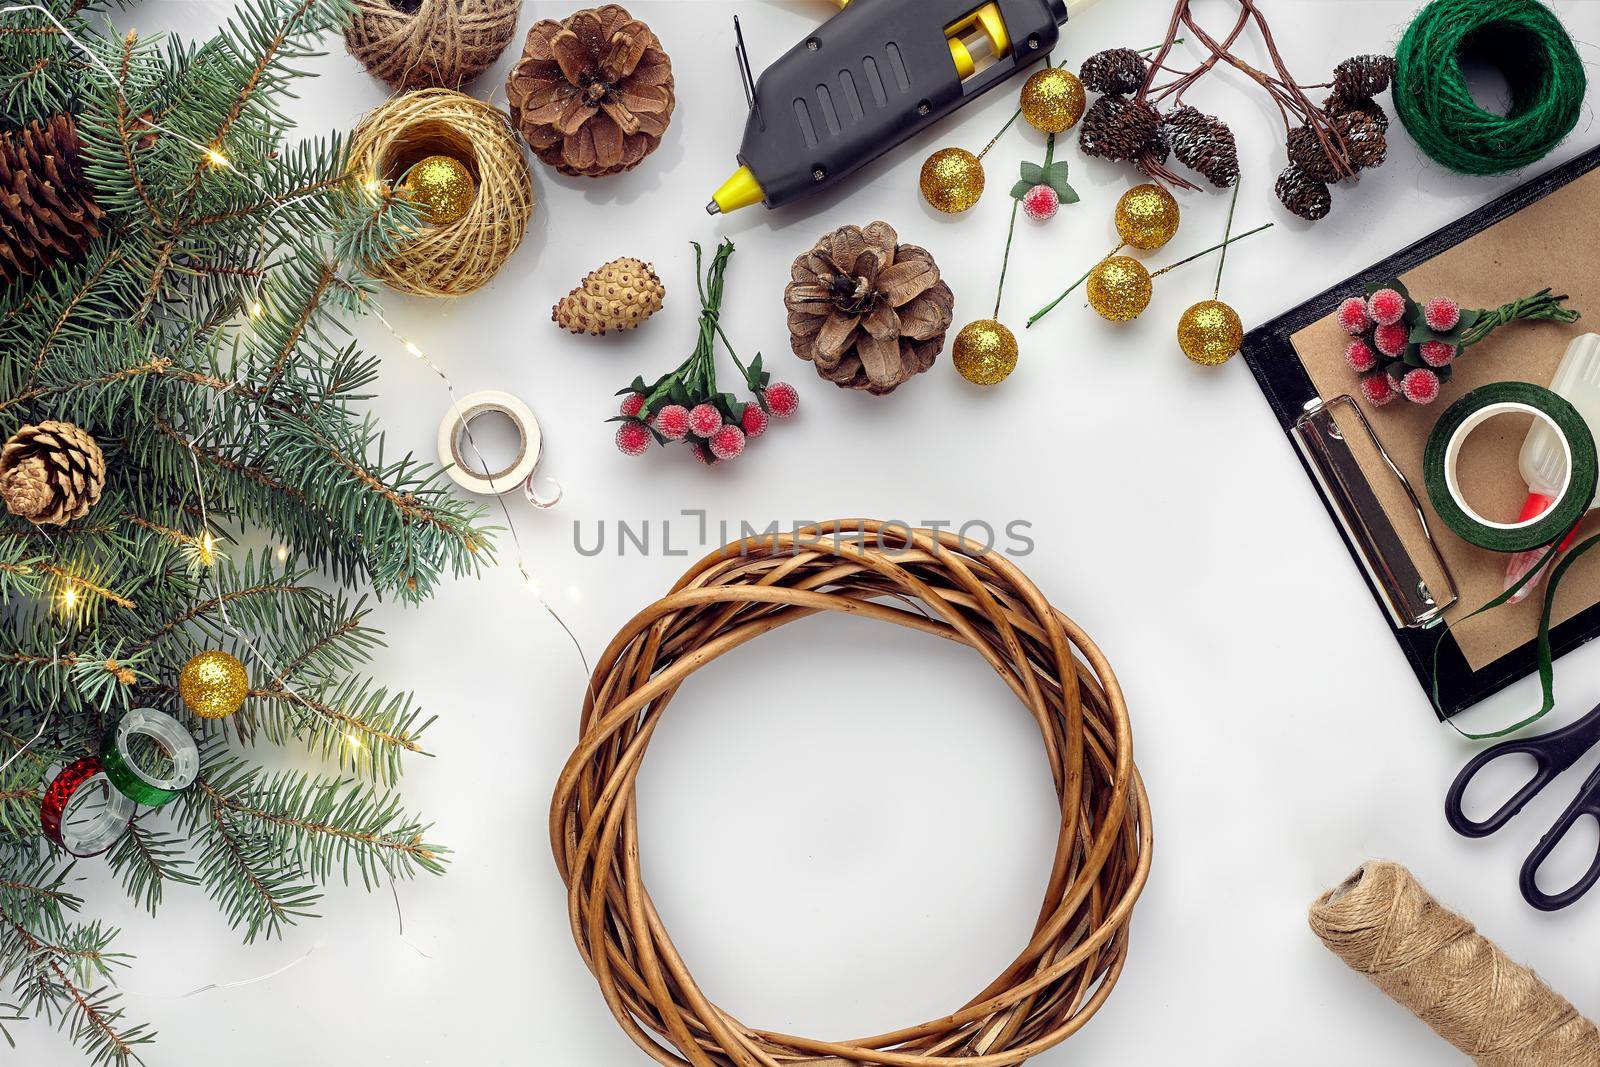 Preparing for Christmas or New Year holiday. Flat-lay of fur tree branches, wreaths, rope, scissors, craft paper over white table background, top view, copy space, horizontal composition